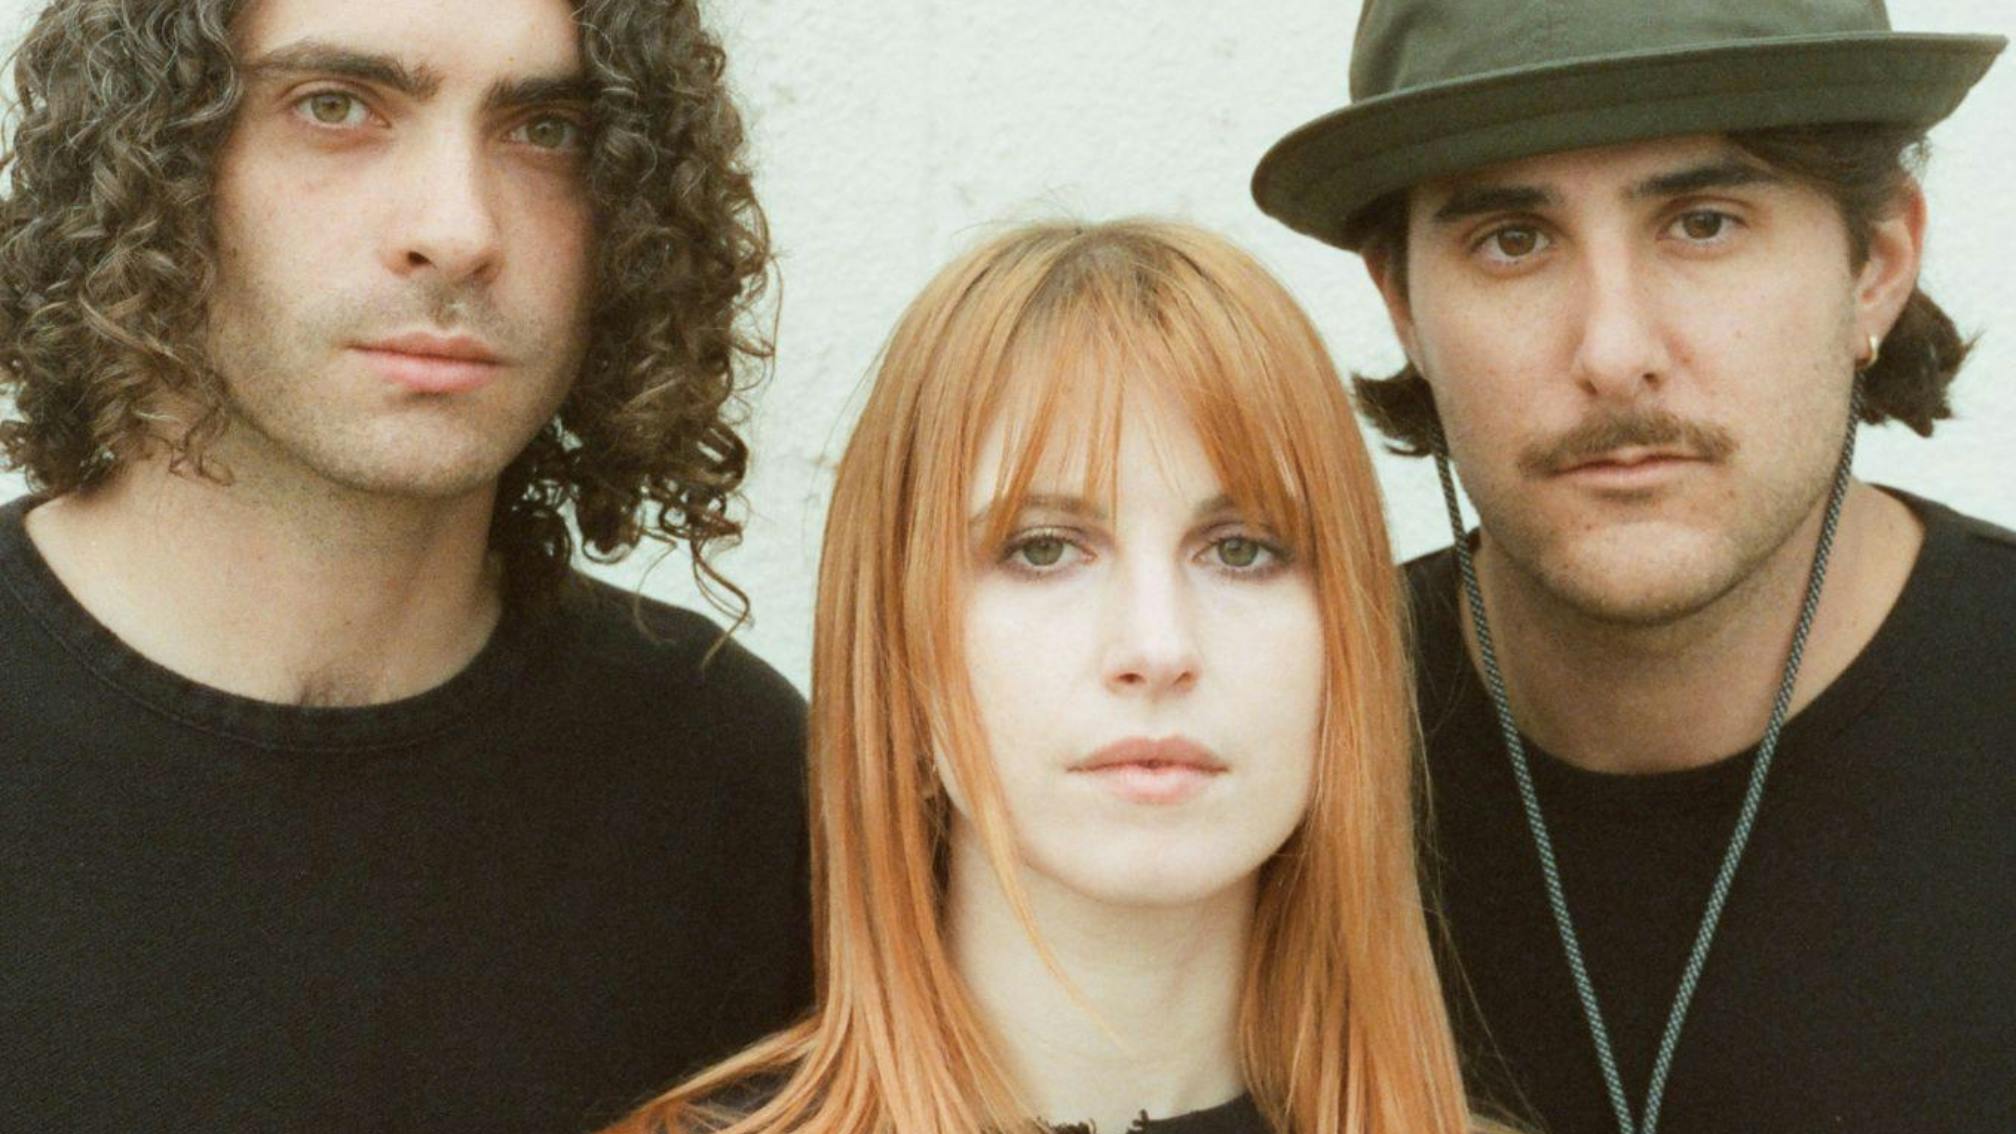 "It won't be long": Paramore are teasing a UK tour